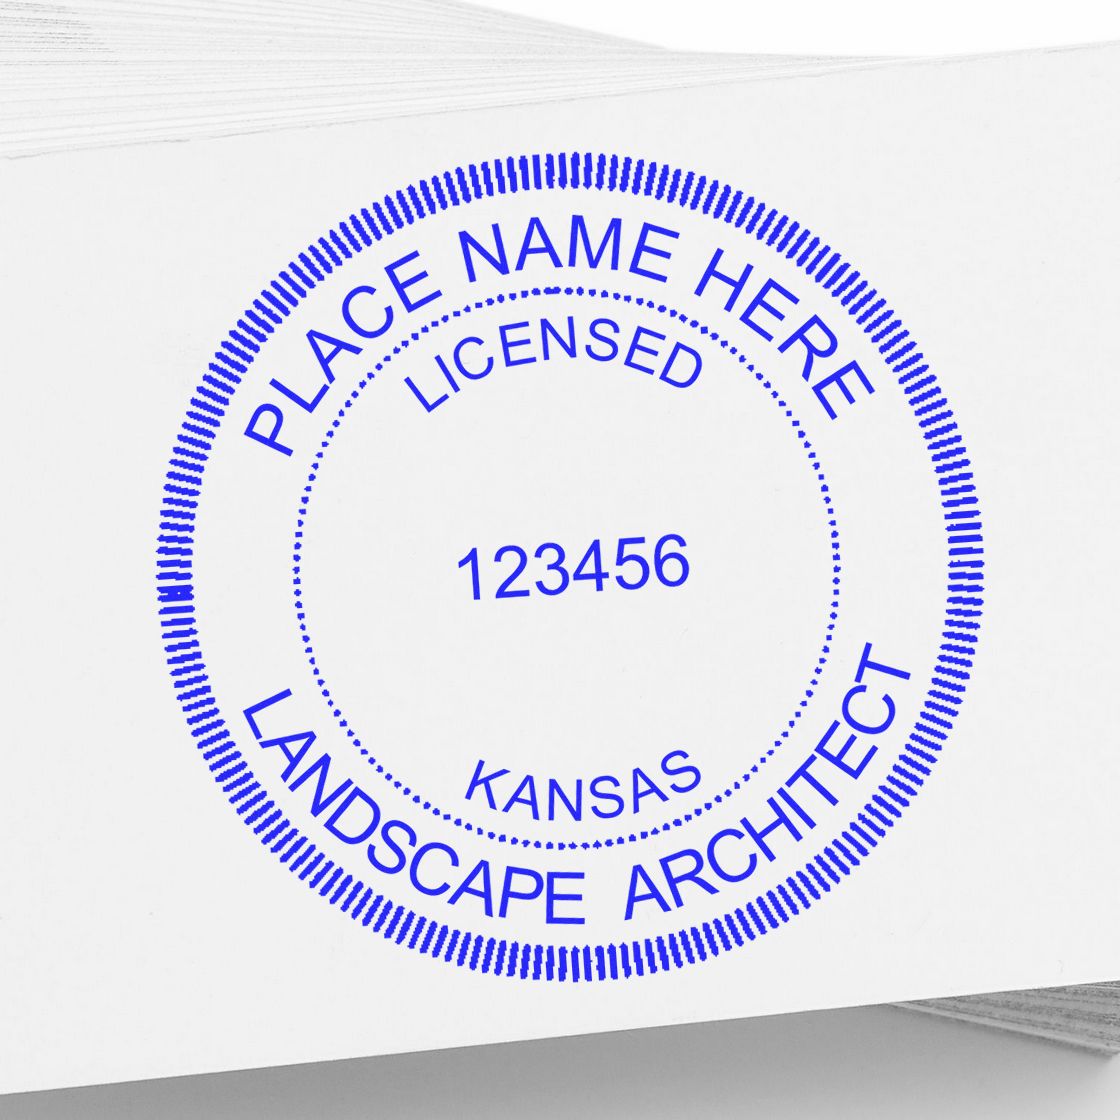 The Digital Kansas Landscape Architect Stamp stamp impression comes to life with a crisp, detailed photo on paper - showcasing true professional quality.